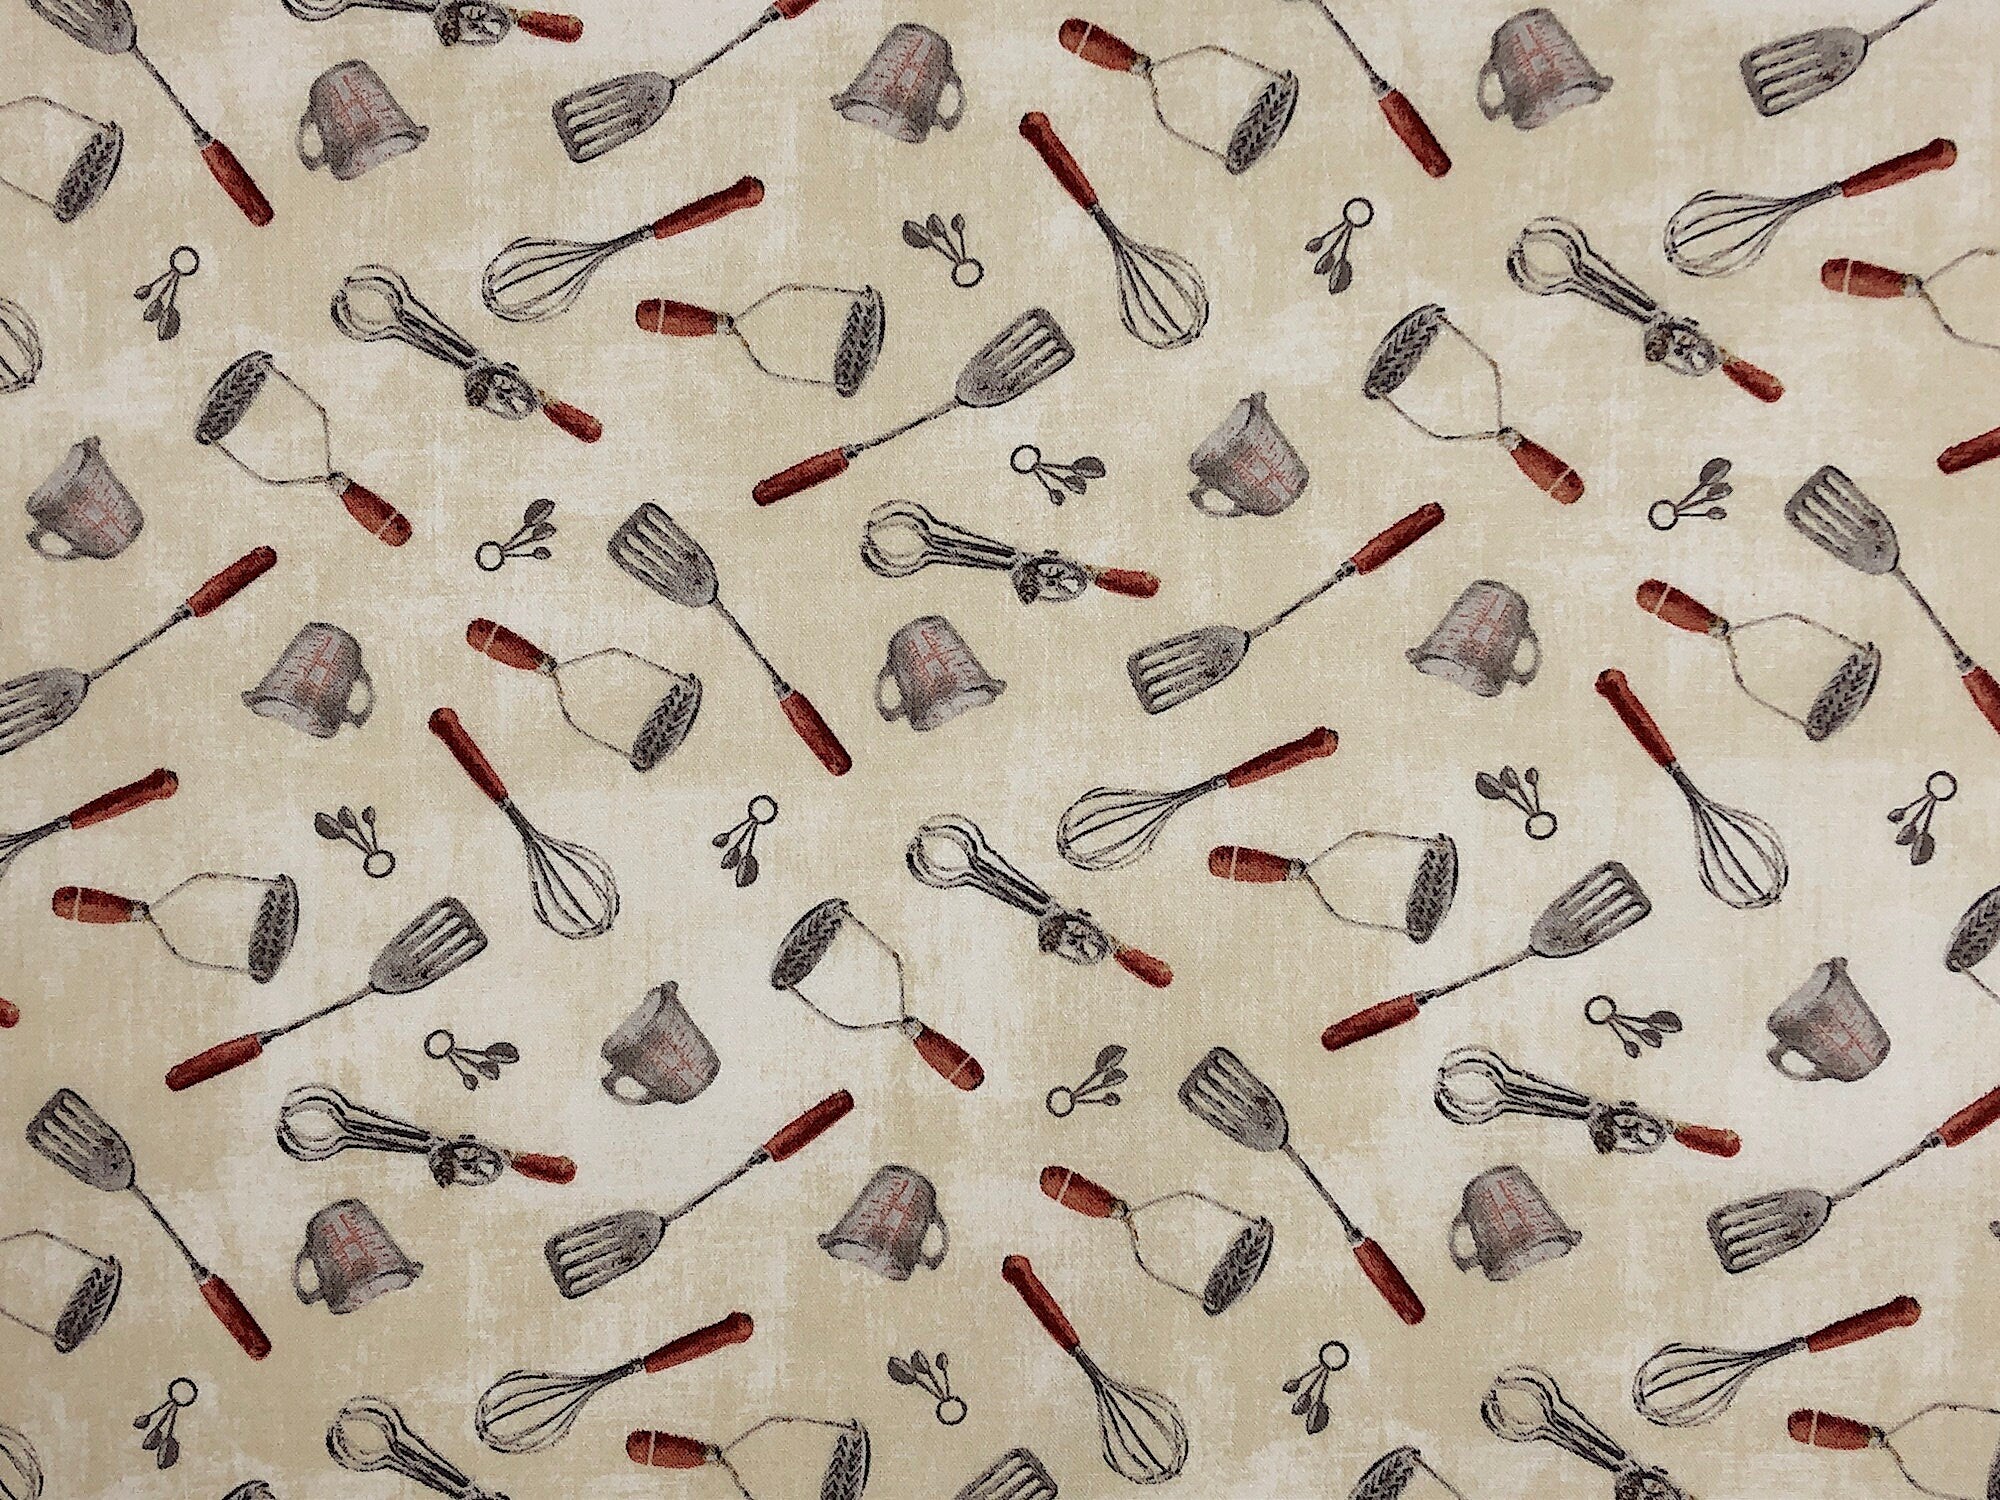 This fabric is called Homemade Happiness and is covered with kitchen utensils such as measuring cups, spatulas, measuring spoons, potato masher whip and more. The background is light cream and a very light beige